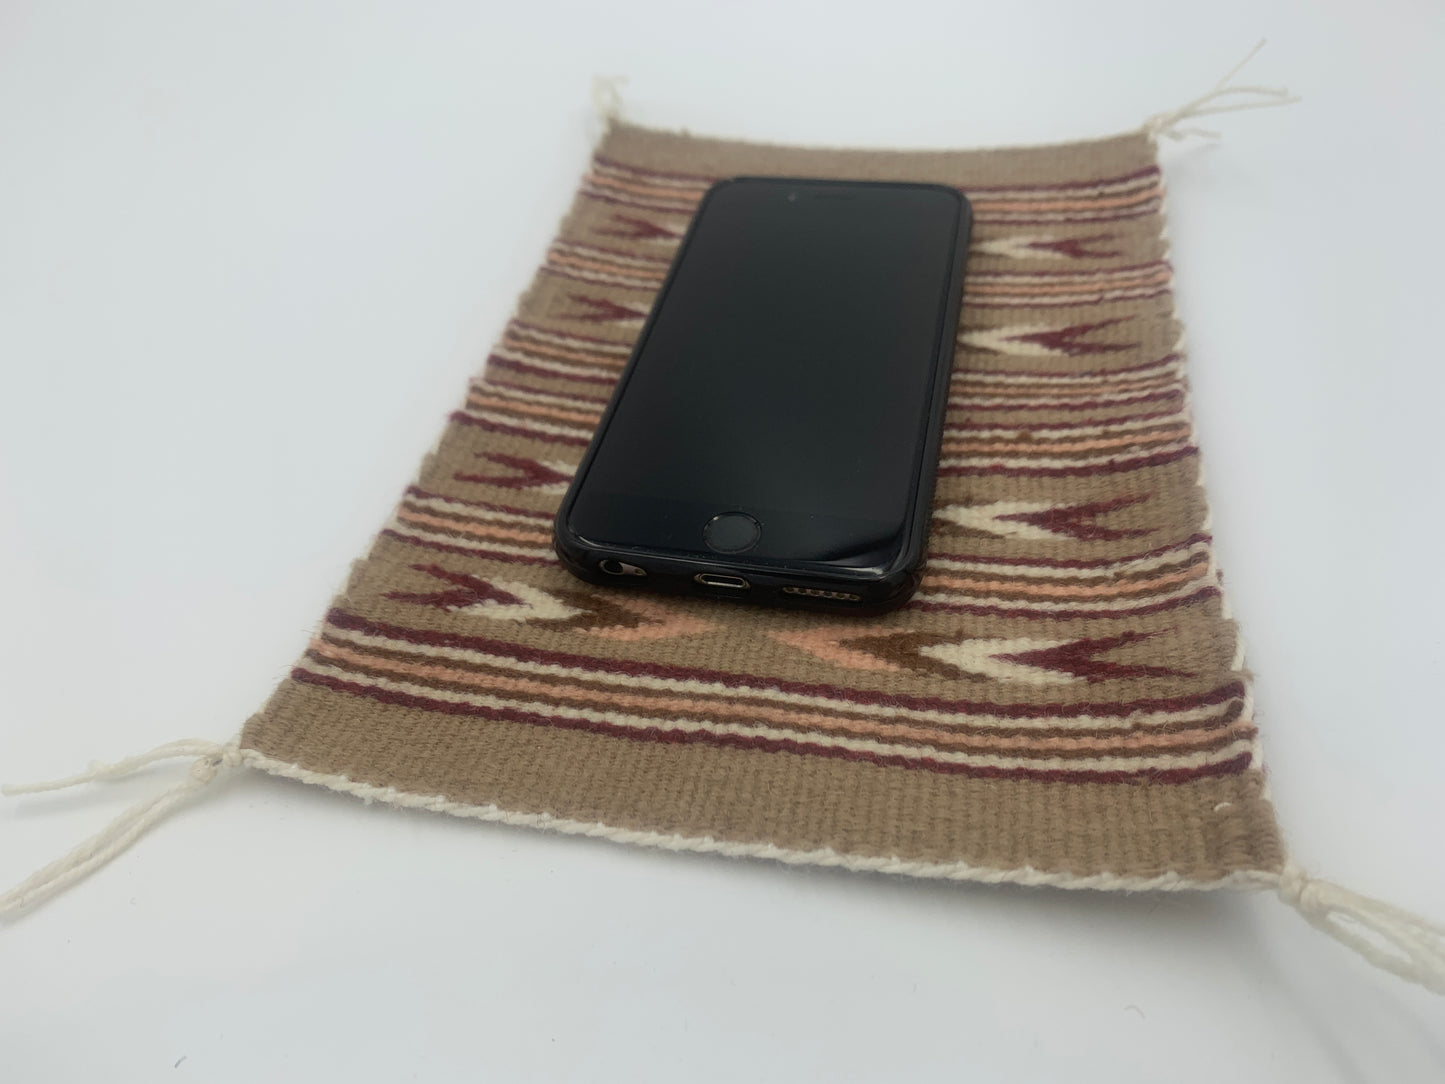 Elouise Bia Chinle Mini Rug for large iPhone